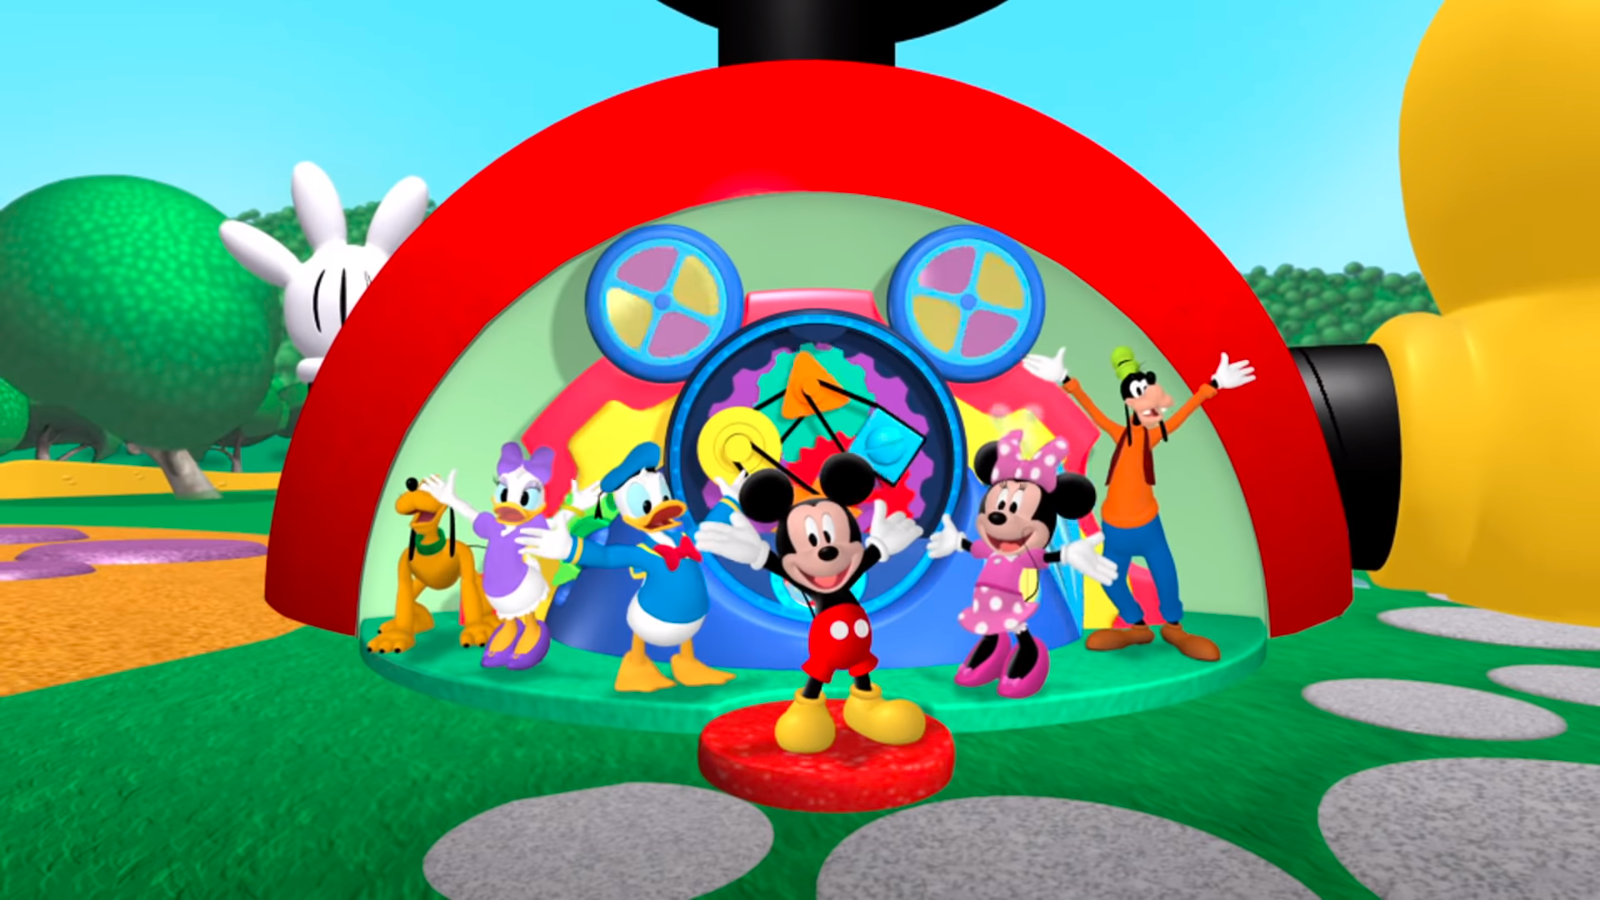 Watch Mickey Mouse Clubhouse, Donald Jr. Season 1 Episode 4 - Donald's Big  Balloon Race Online Now